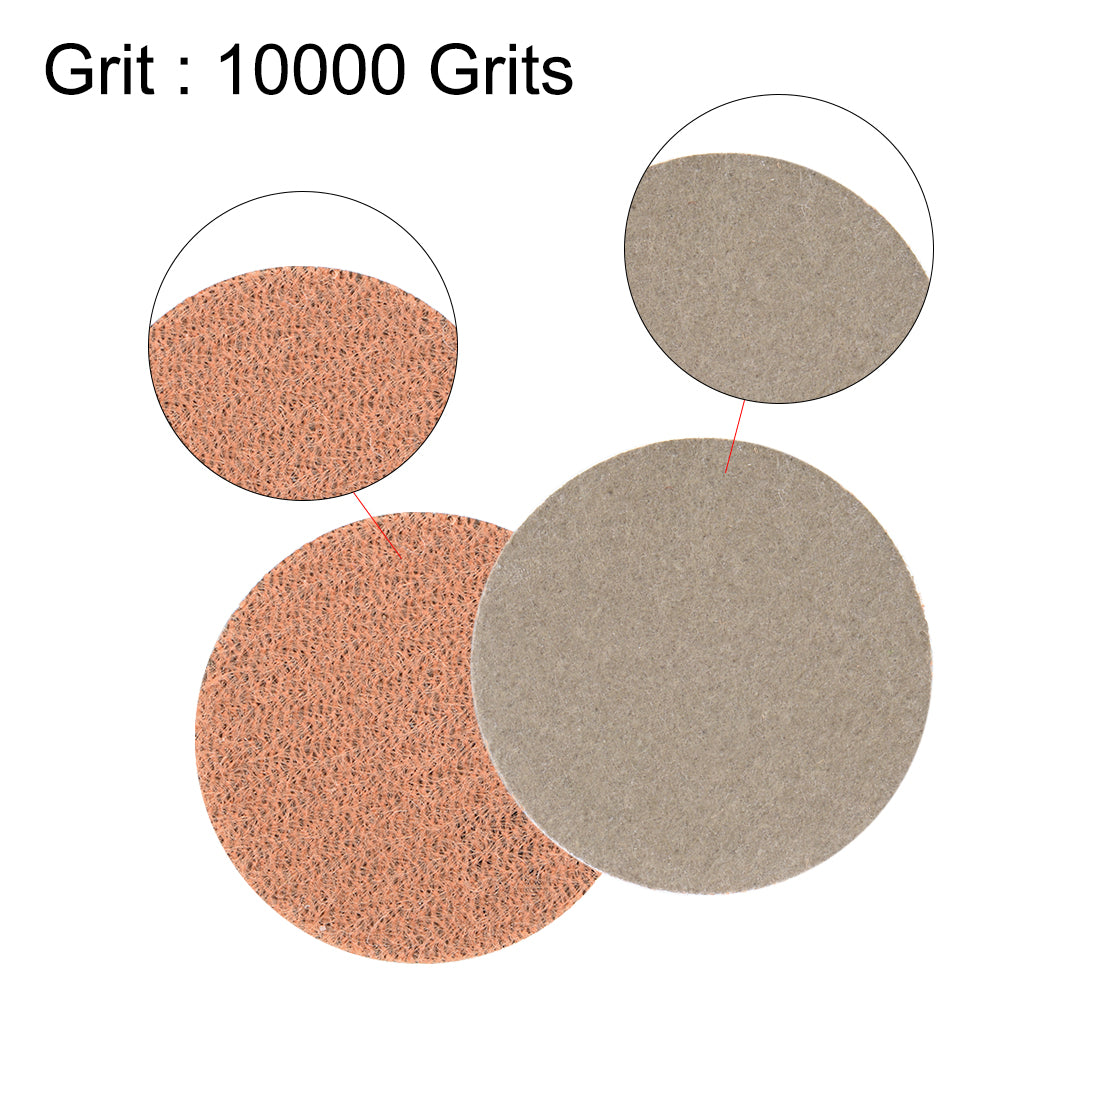 Uxcell Uxcell 1-Inch Hook and Loop Sanding Disc Aluminum Oxide Silicon Carbide 5000 Grit 10pcs